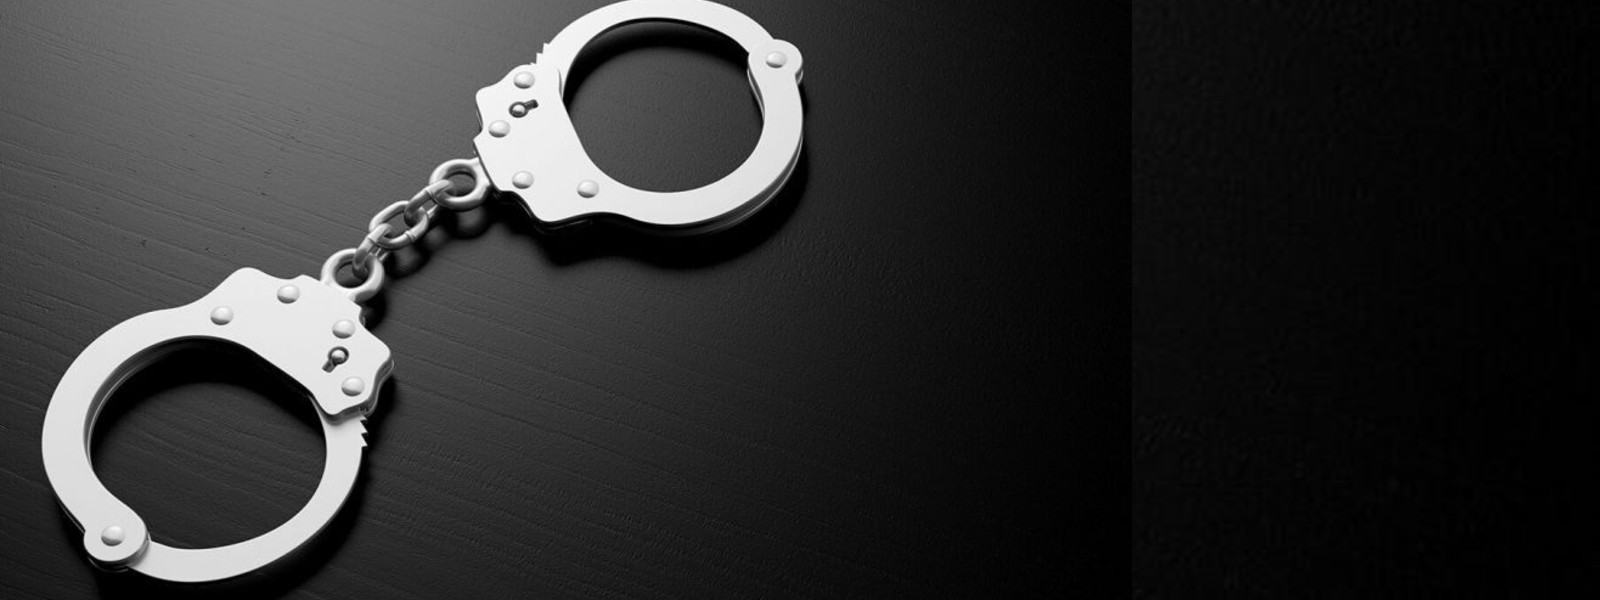 22 criminal associates arrested so far this year – STF